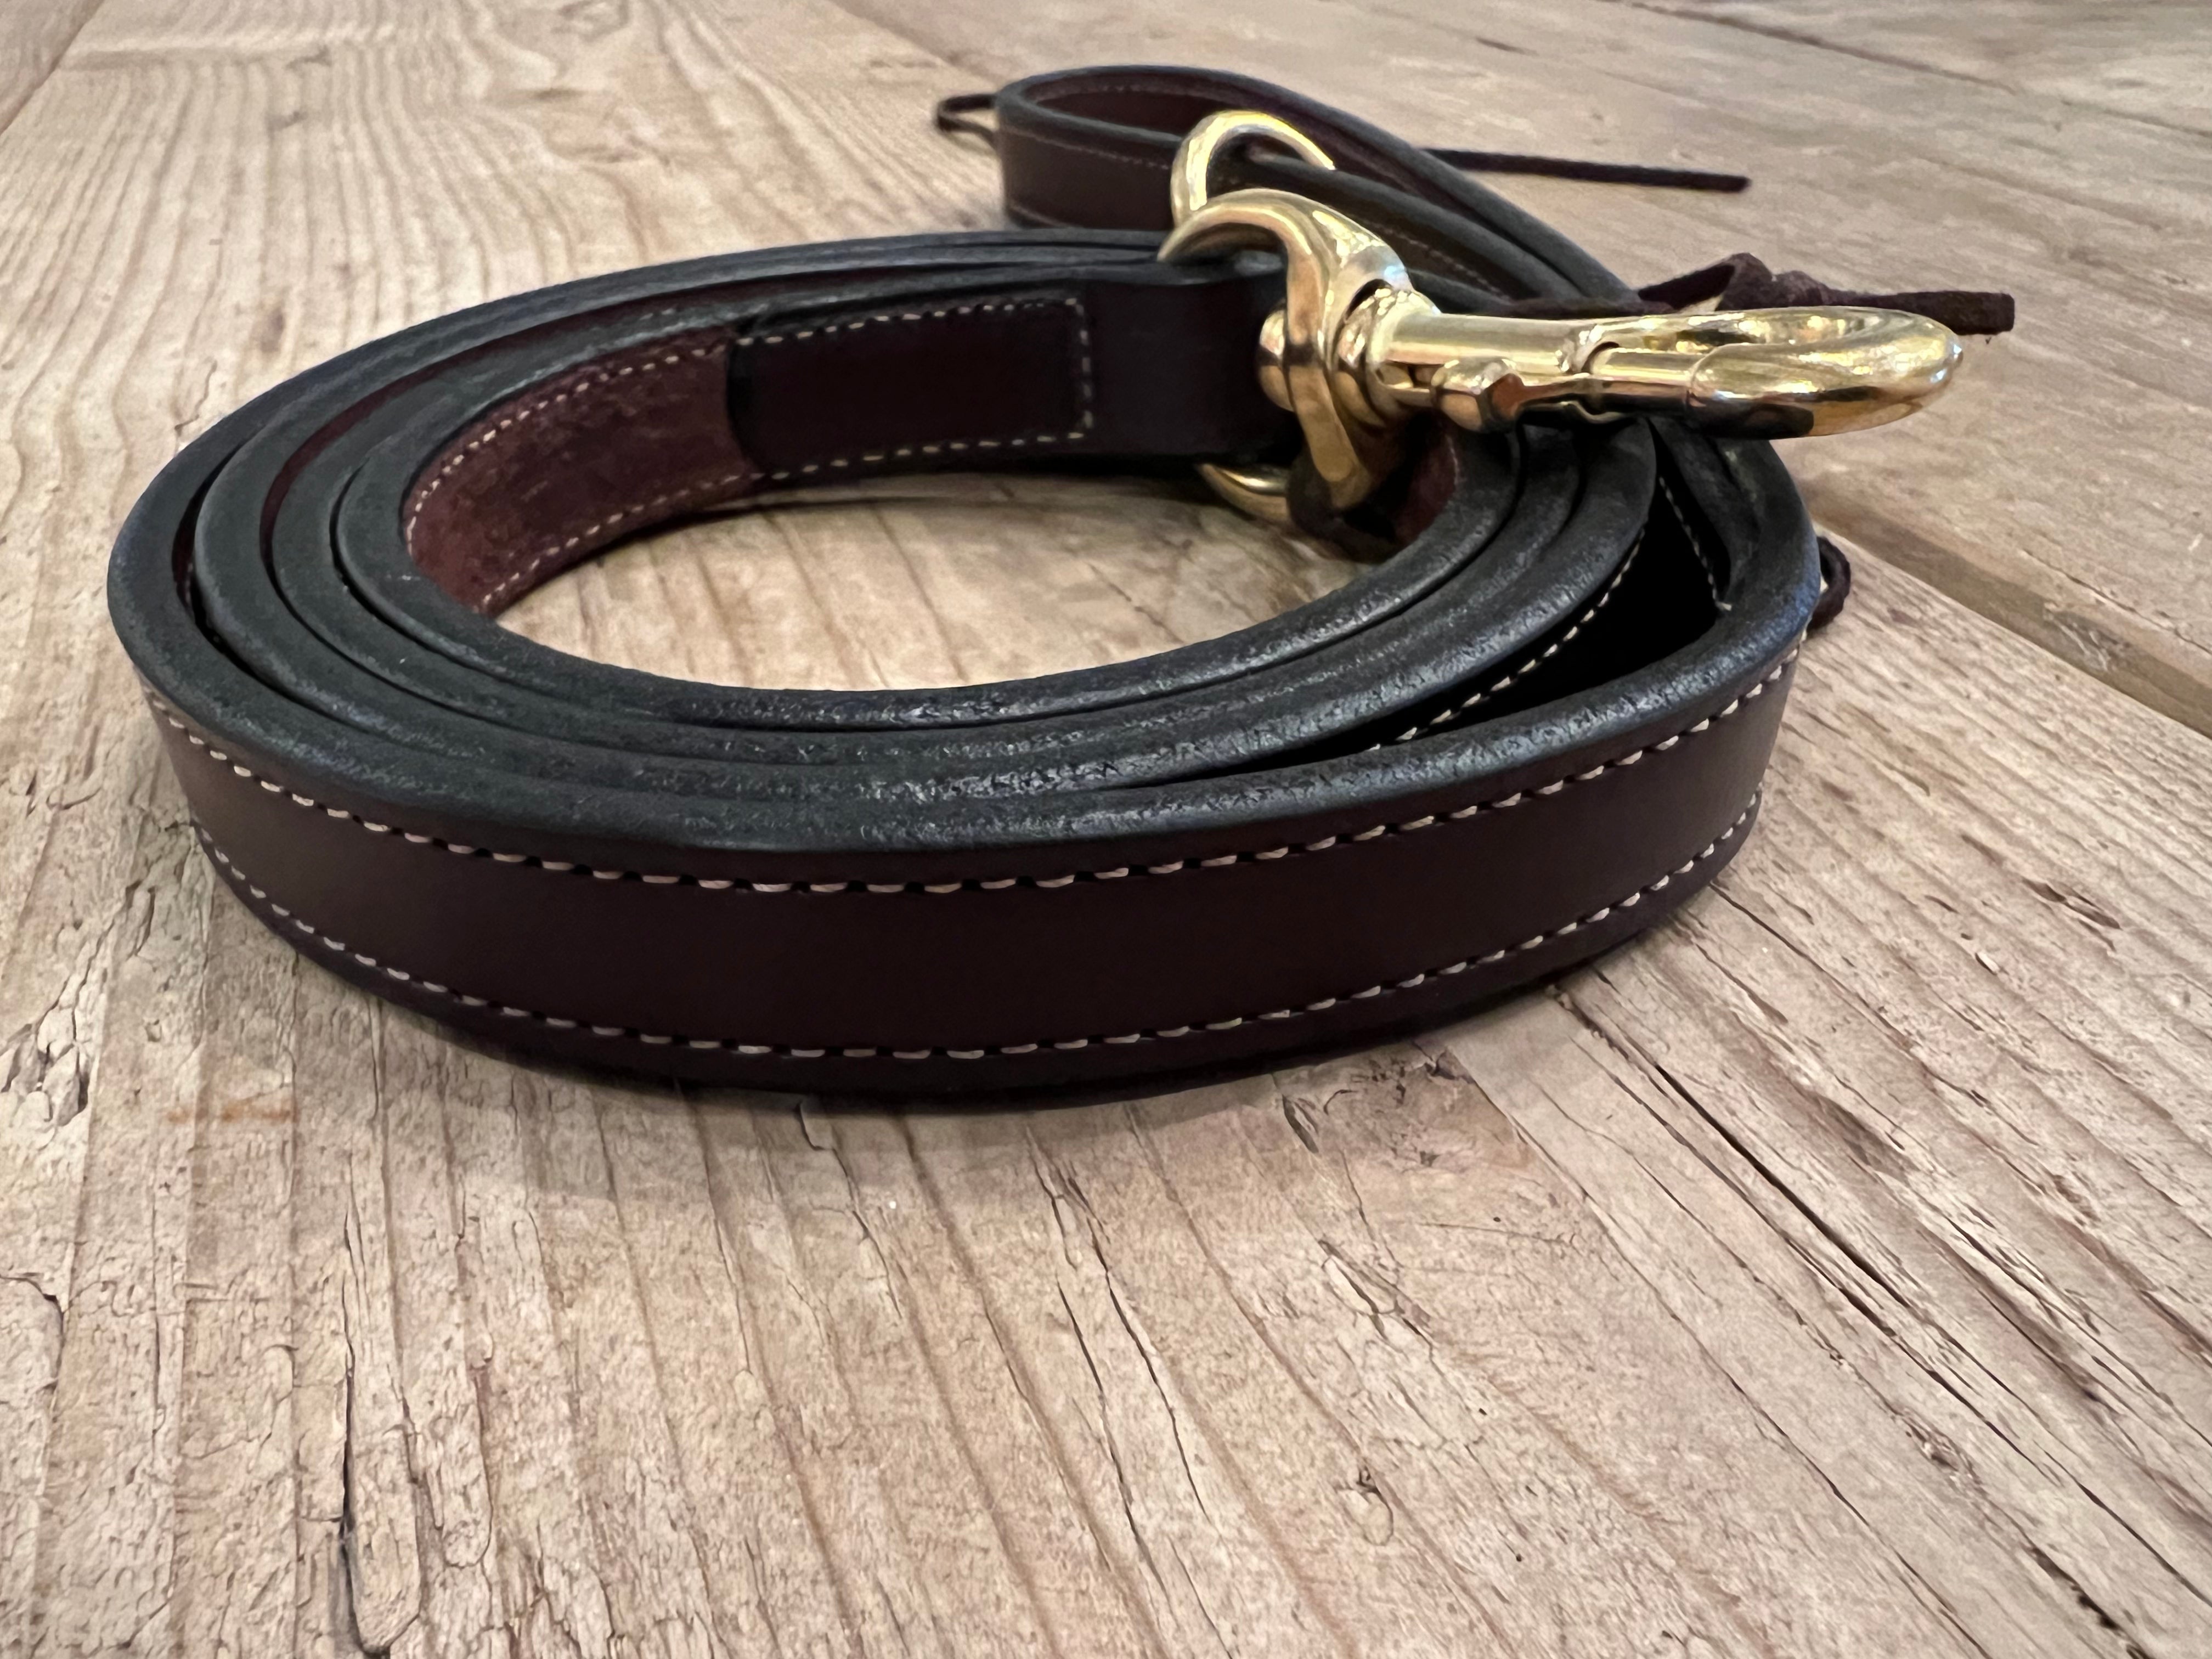 Stitched Havana and Brass Leash with brass ring